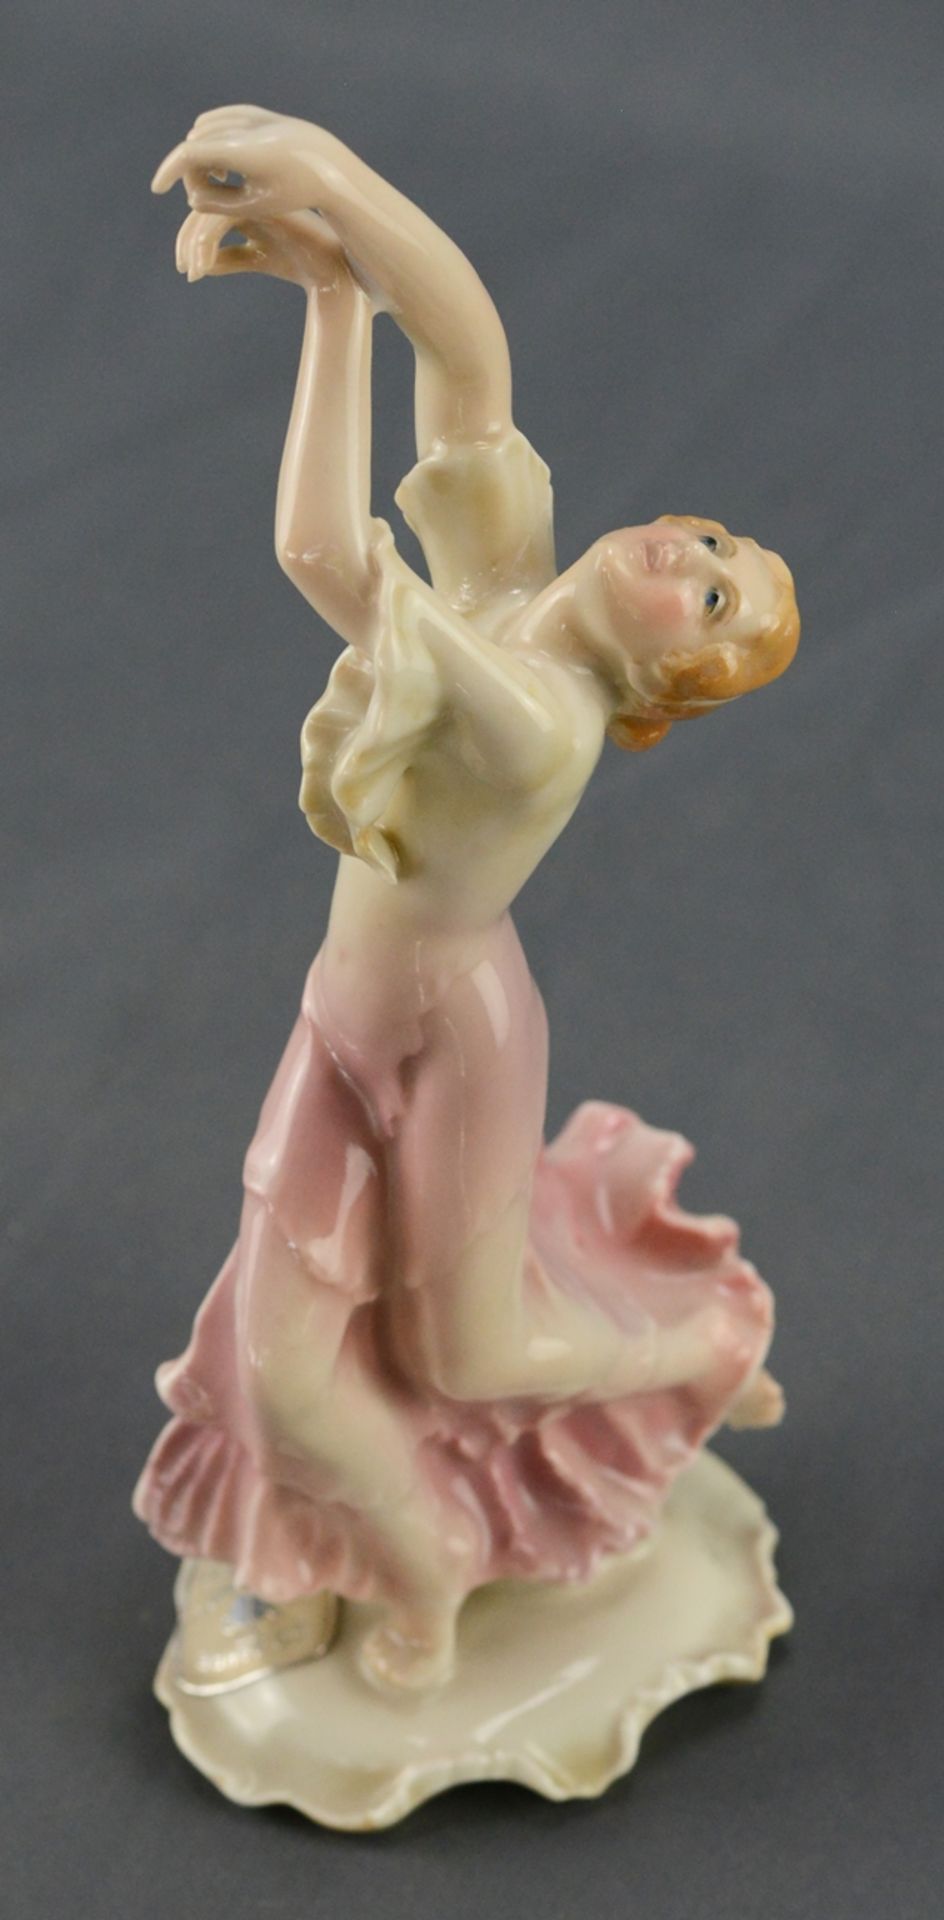 Dancer, in dramatic pose, on curved base, finely polychrome painted, Ens, 20th century, height 21cm - Image 6 of 8